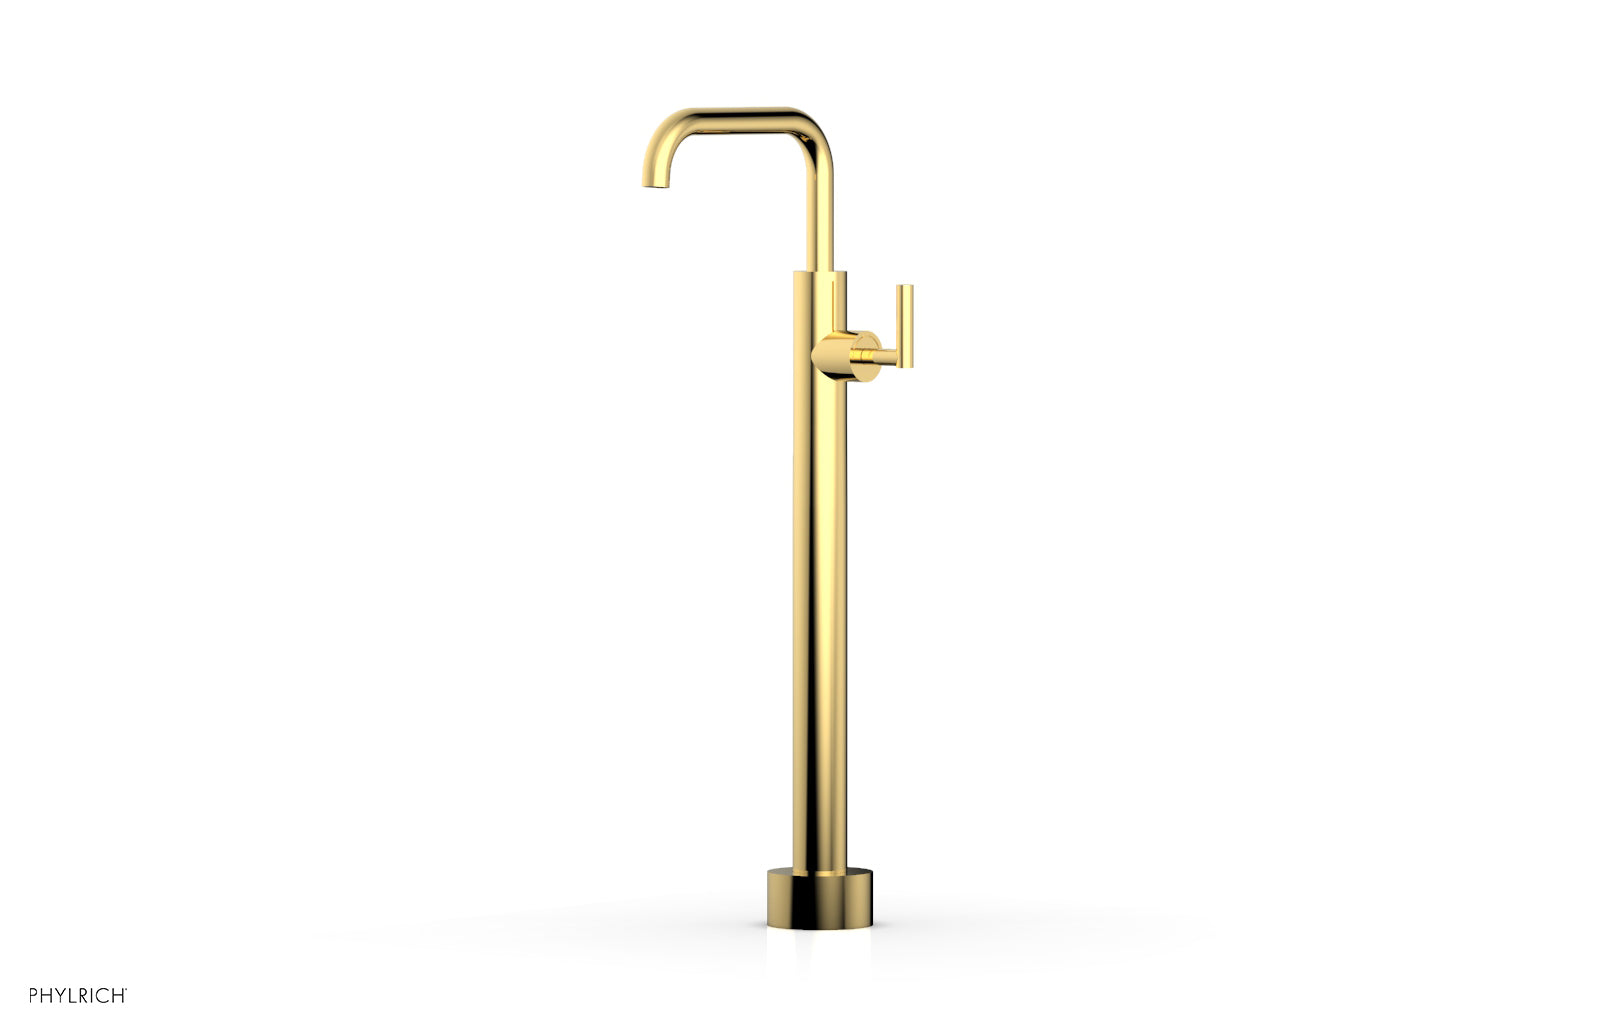 Phylrich TRANSITION Low Floor Mount Tub Filler - Lever Handle